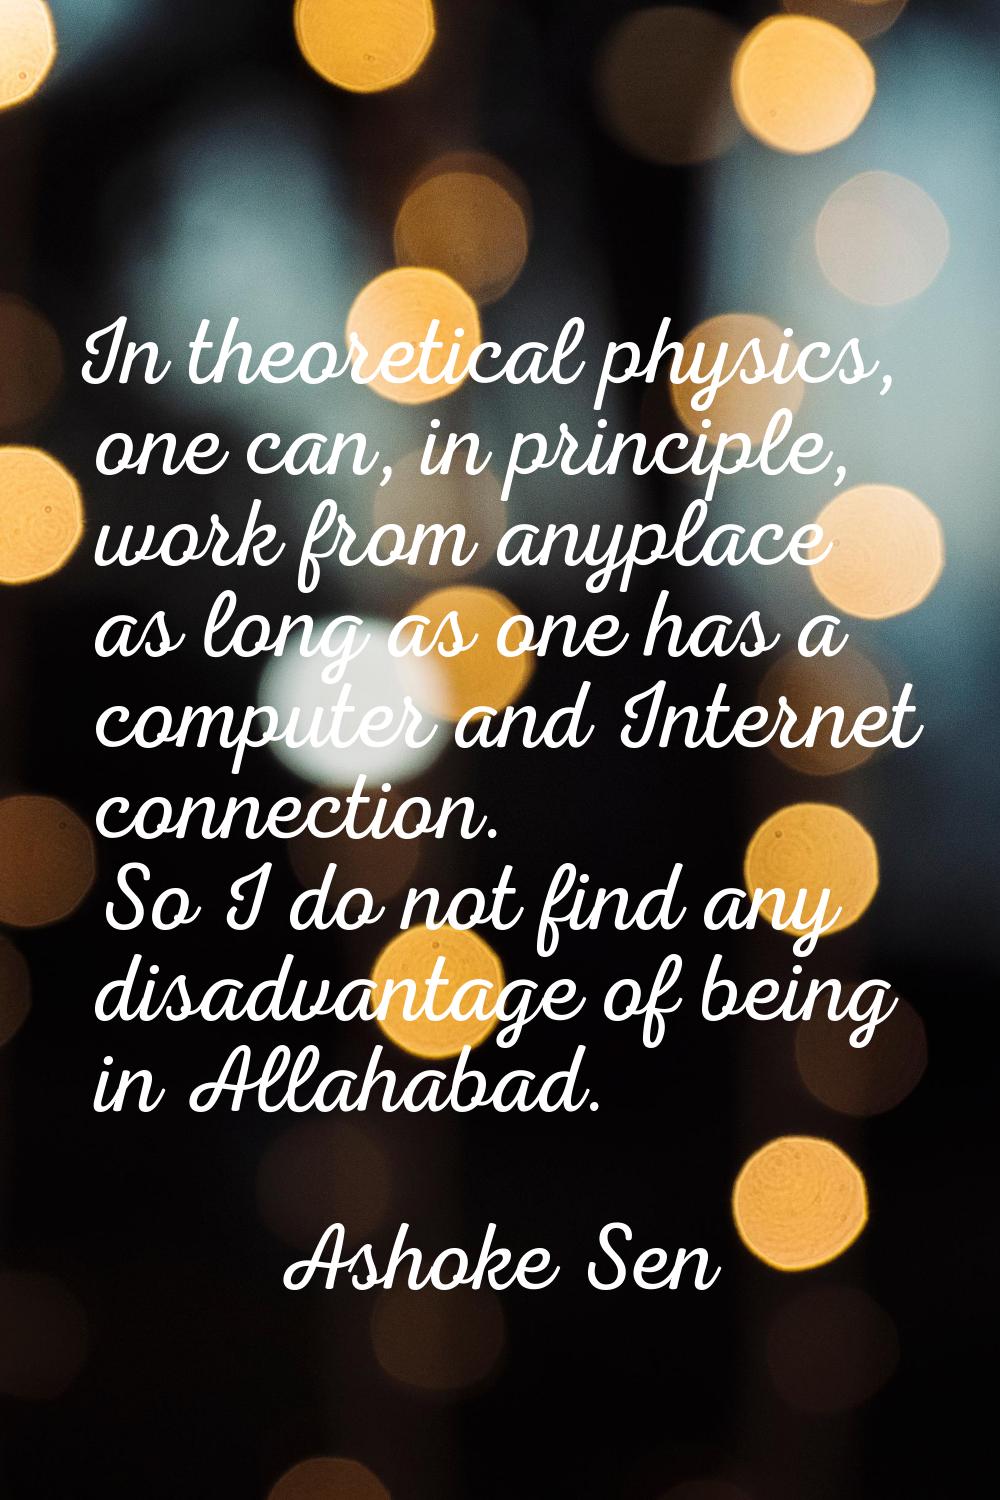 In theoretical physics, one can, in principle, work from anyplace as long as one has a computer and